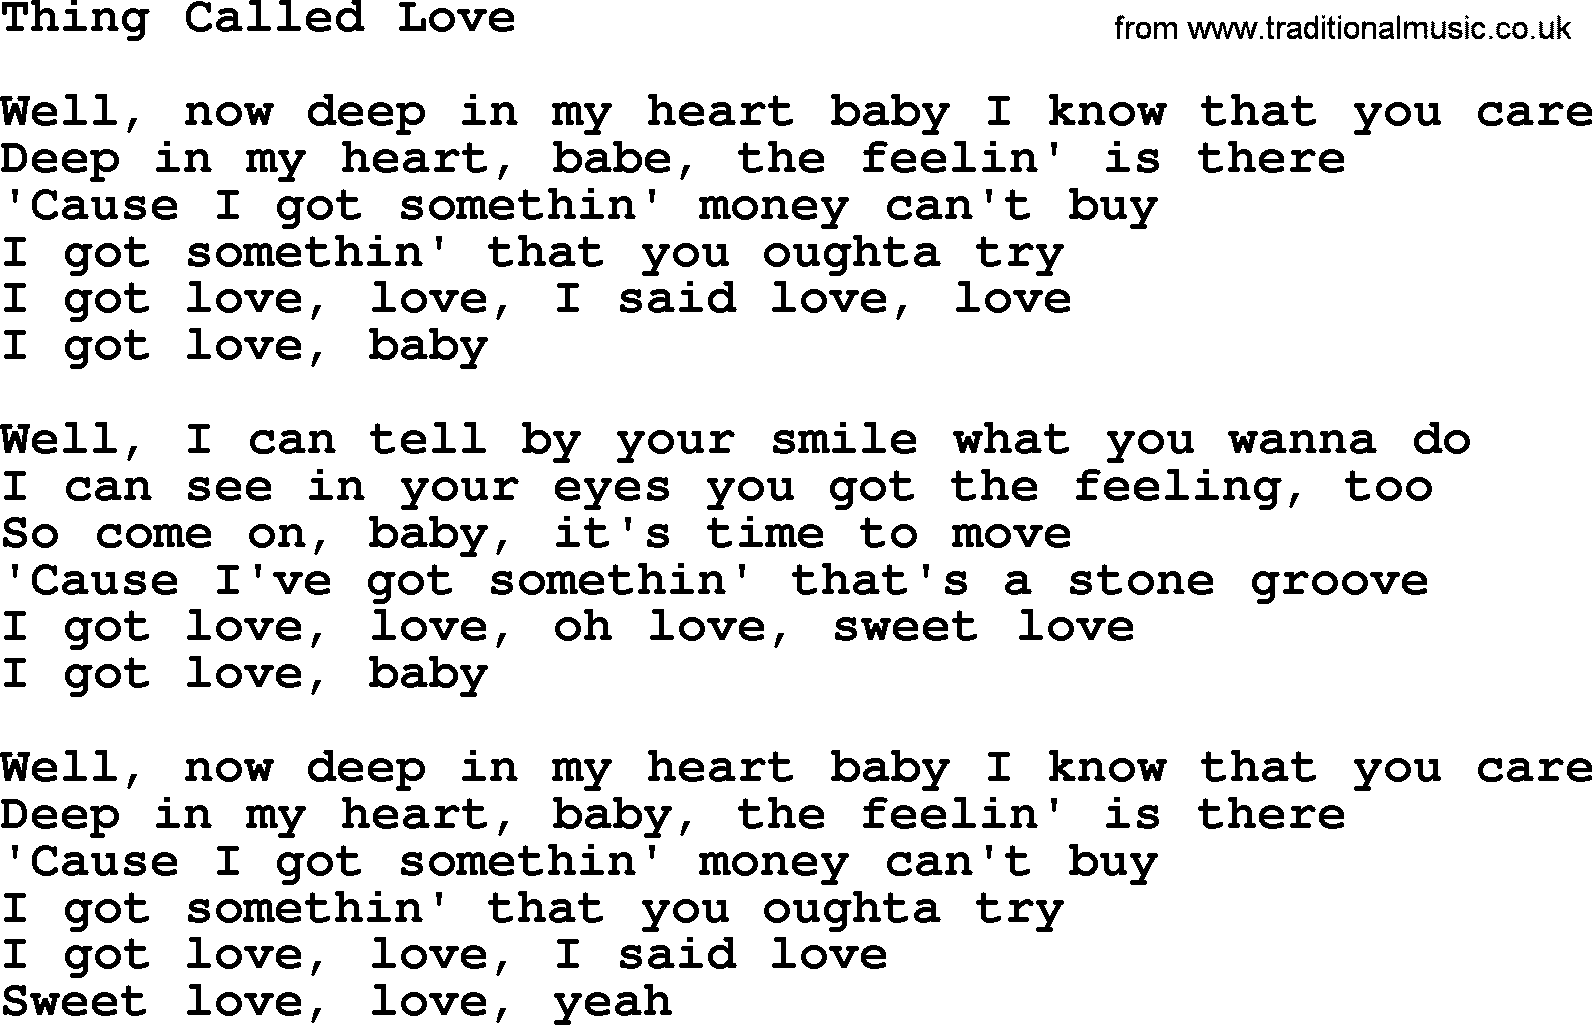 The Byrds song Thing Called Love, lyrics